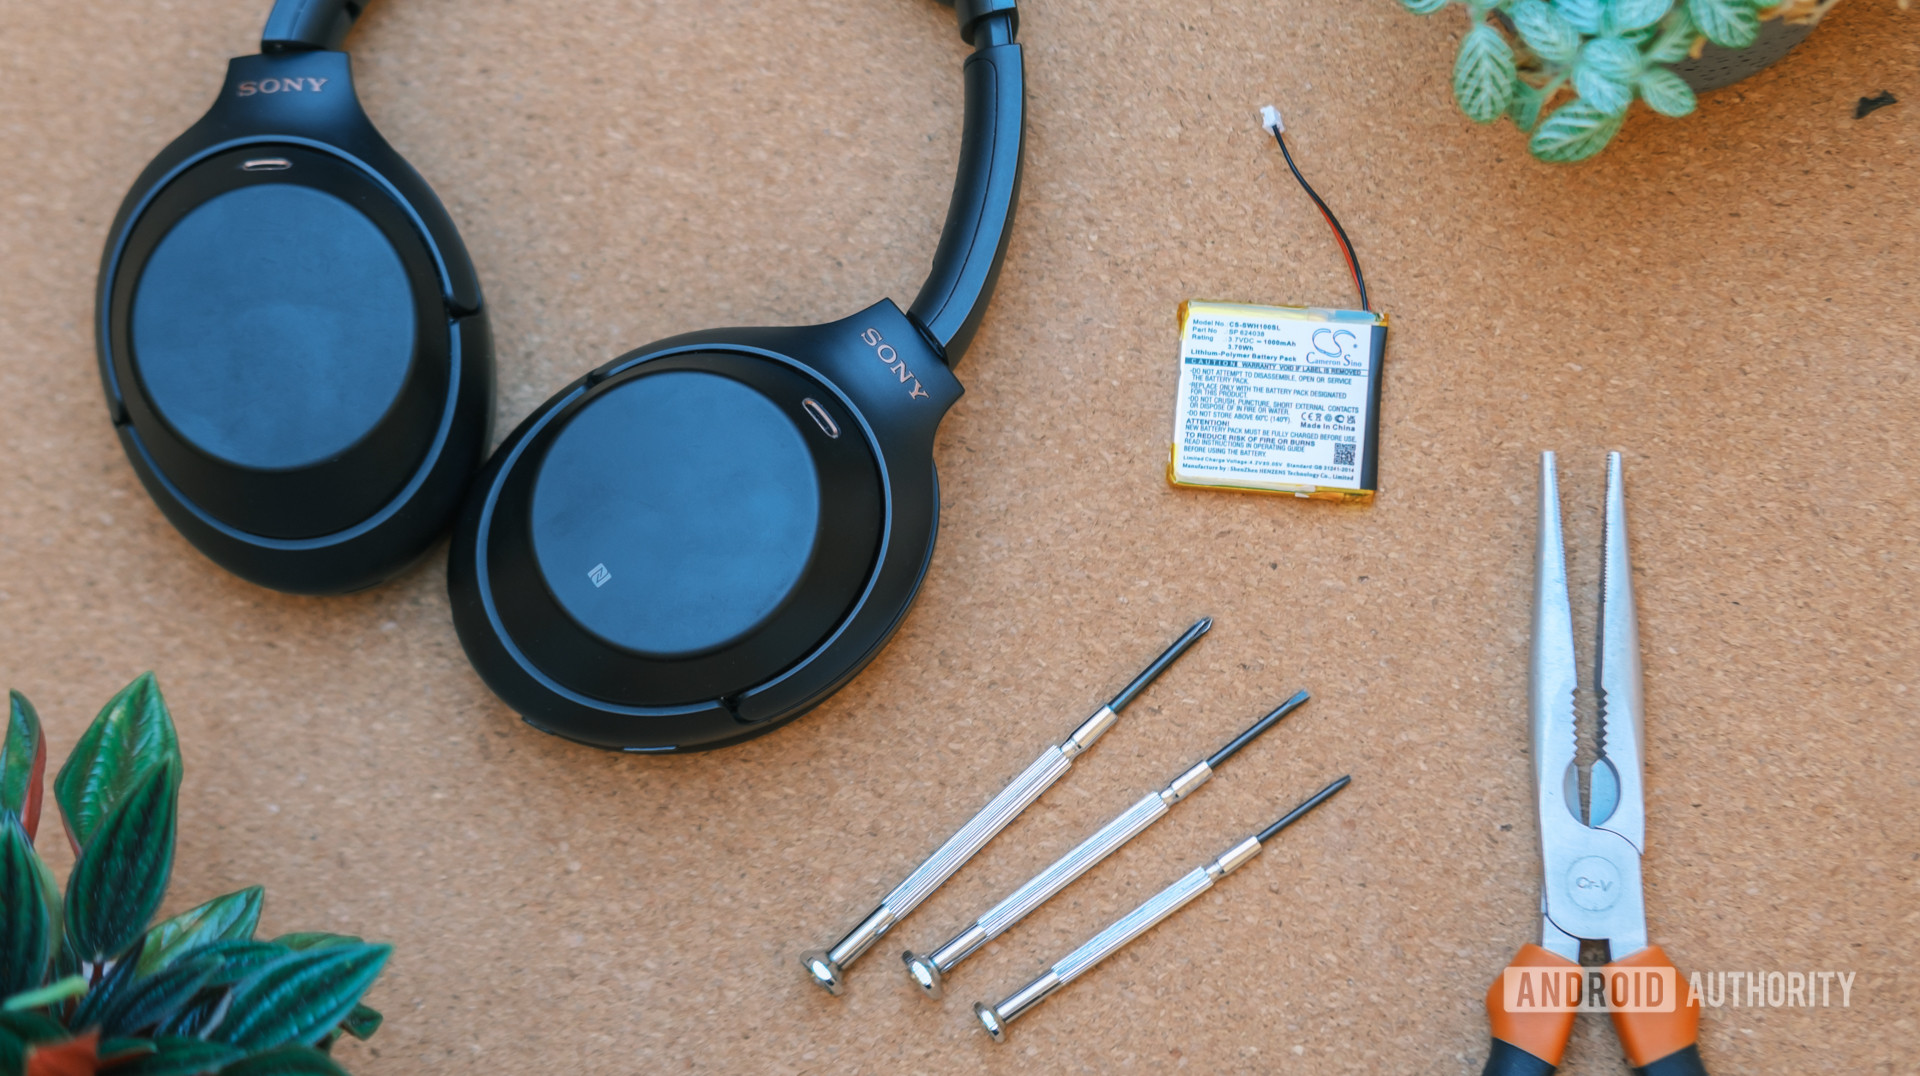 Sony WH 1000MX3 repair showing the headphones along with various tools.